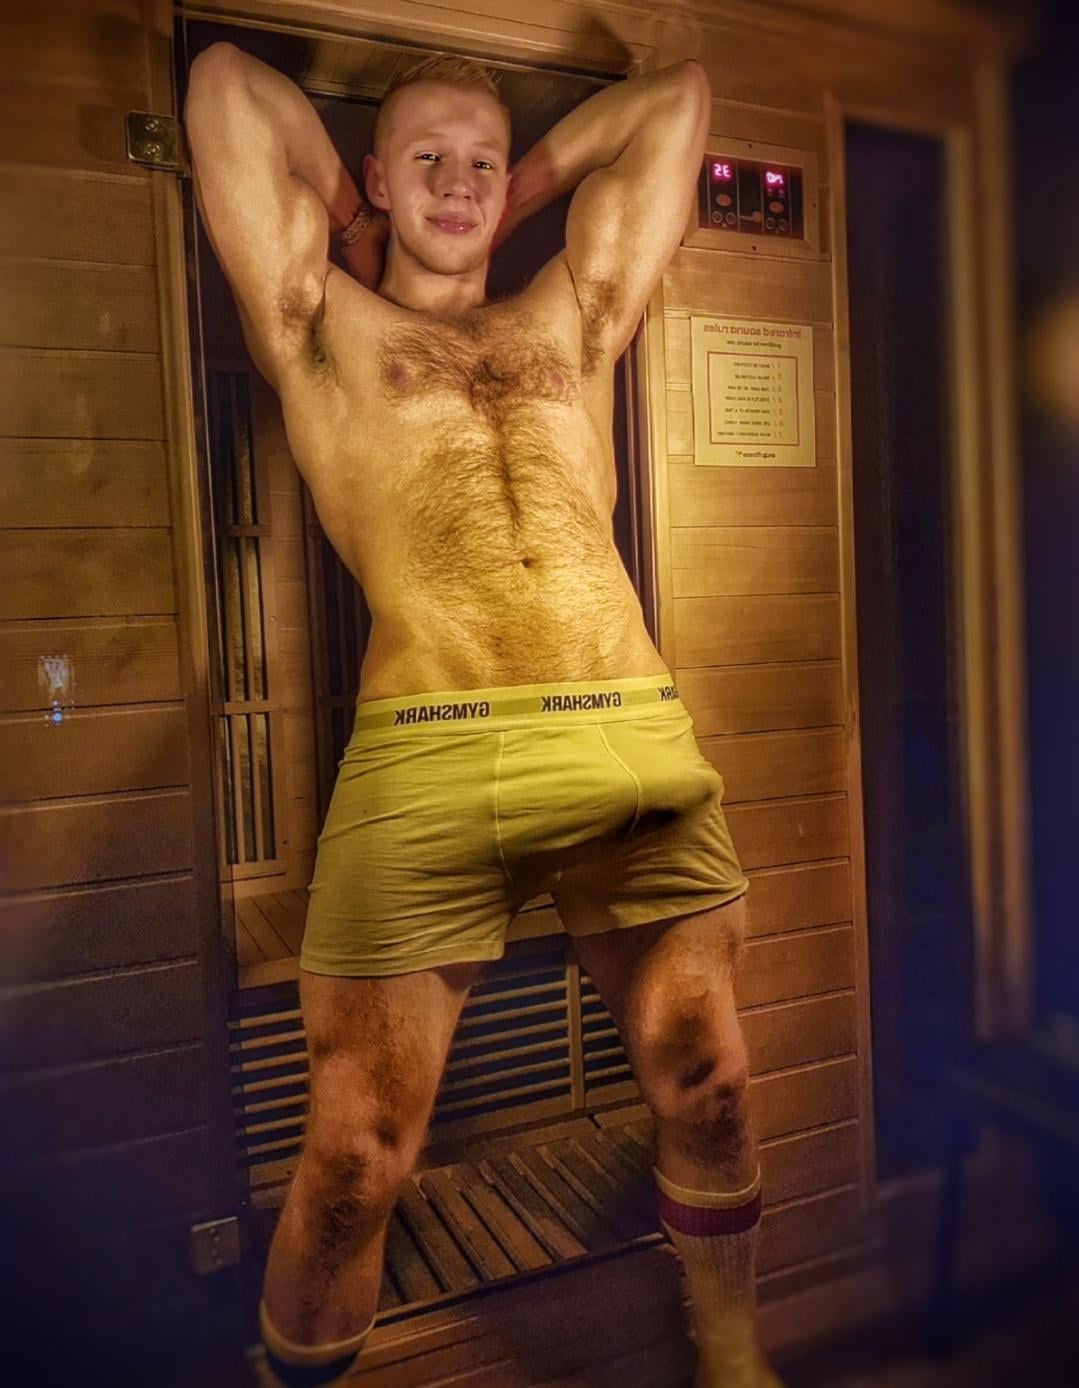 Let me know if youd follow me into the sauna